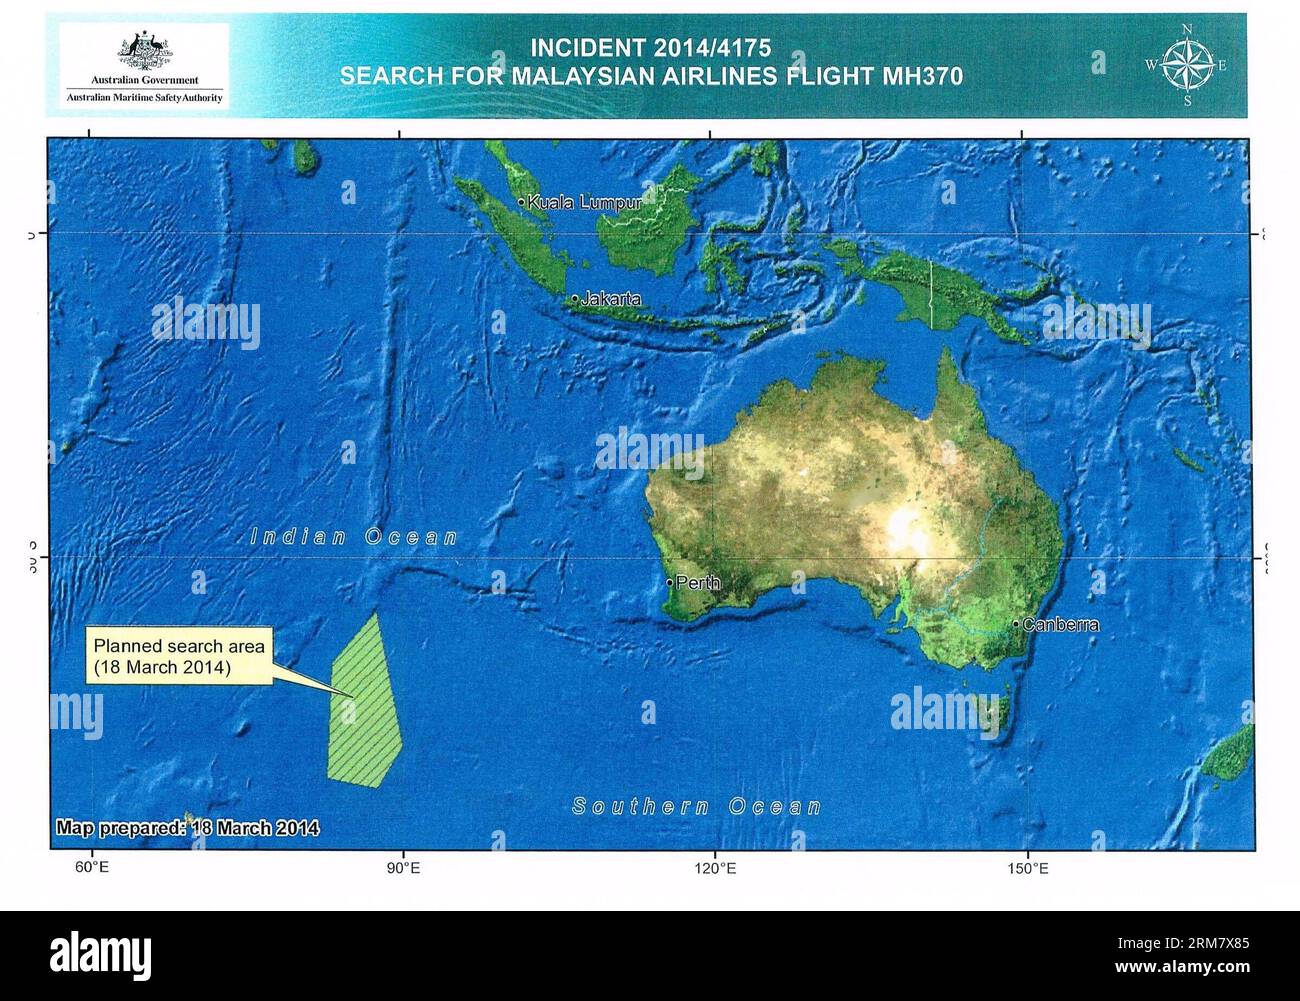 (140318) -- CANBERRA, March 18, 2014 (Xinhua) -- The scanned version of the map released on March 18, 2014 by Australian Maritime Safety Authority (AMSA) shows planned search area (shaded area). AMSA said on Tuesday that Australia has begun the search operation for missing Malaysia Airline Flight MH370 in an area of 600,000 square kilometers off Western Australian coast. (Xinhua) (djj) AUSTRALIA-CANBERRA-MISSING MALAYSIAN PLANE-SEARCH PUBLICATIONxNOTxINxCHN   Canberra March 18 2014 XINHUA The scanned Version of The Map released ON March 18 2014 by Australian Maritime Safety Authority AMSA Show Stock Photo